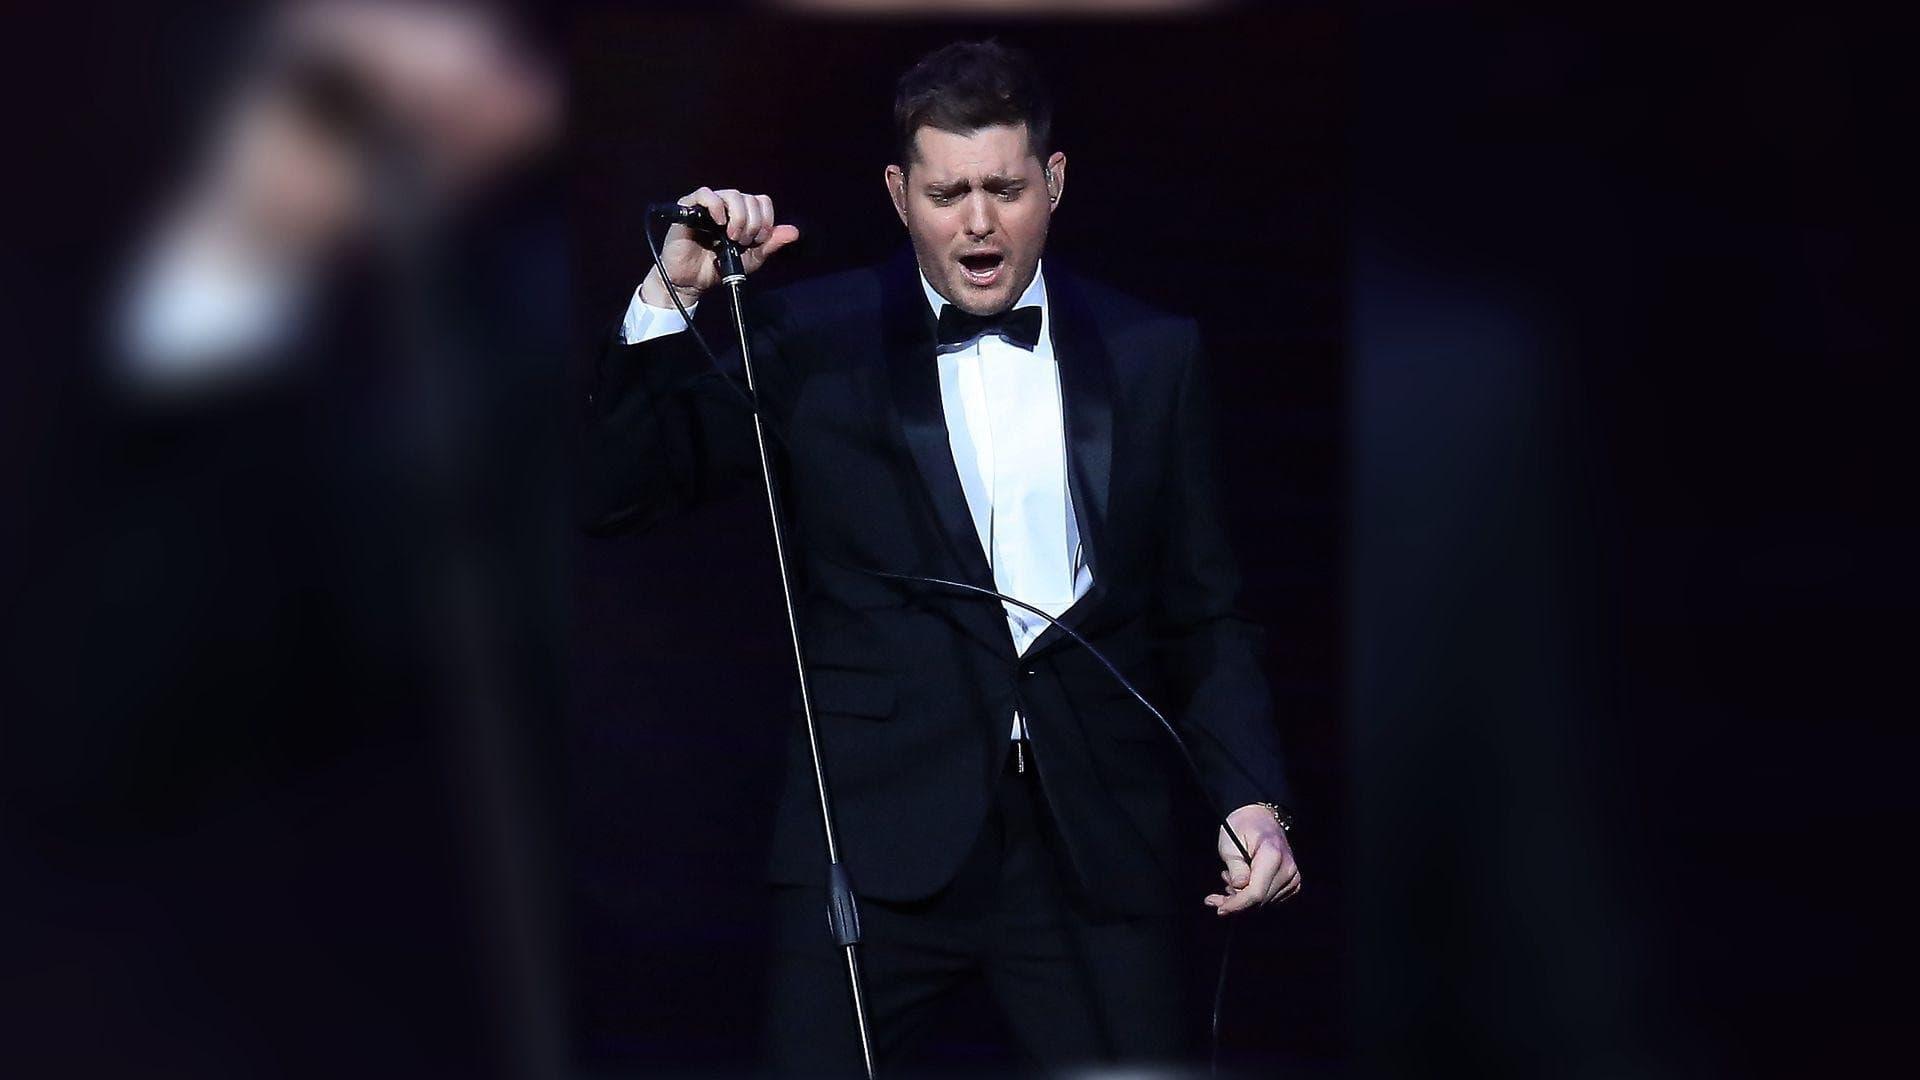 Michael Buble: Simply Buble backdrop